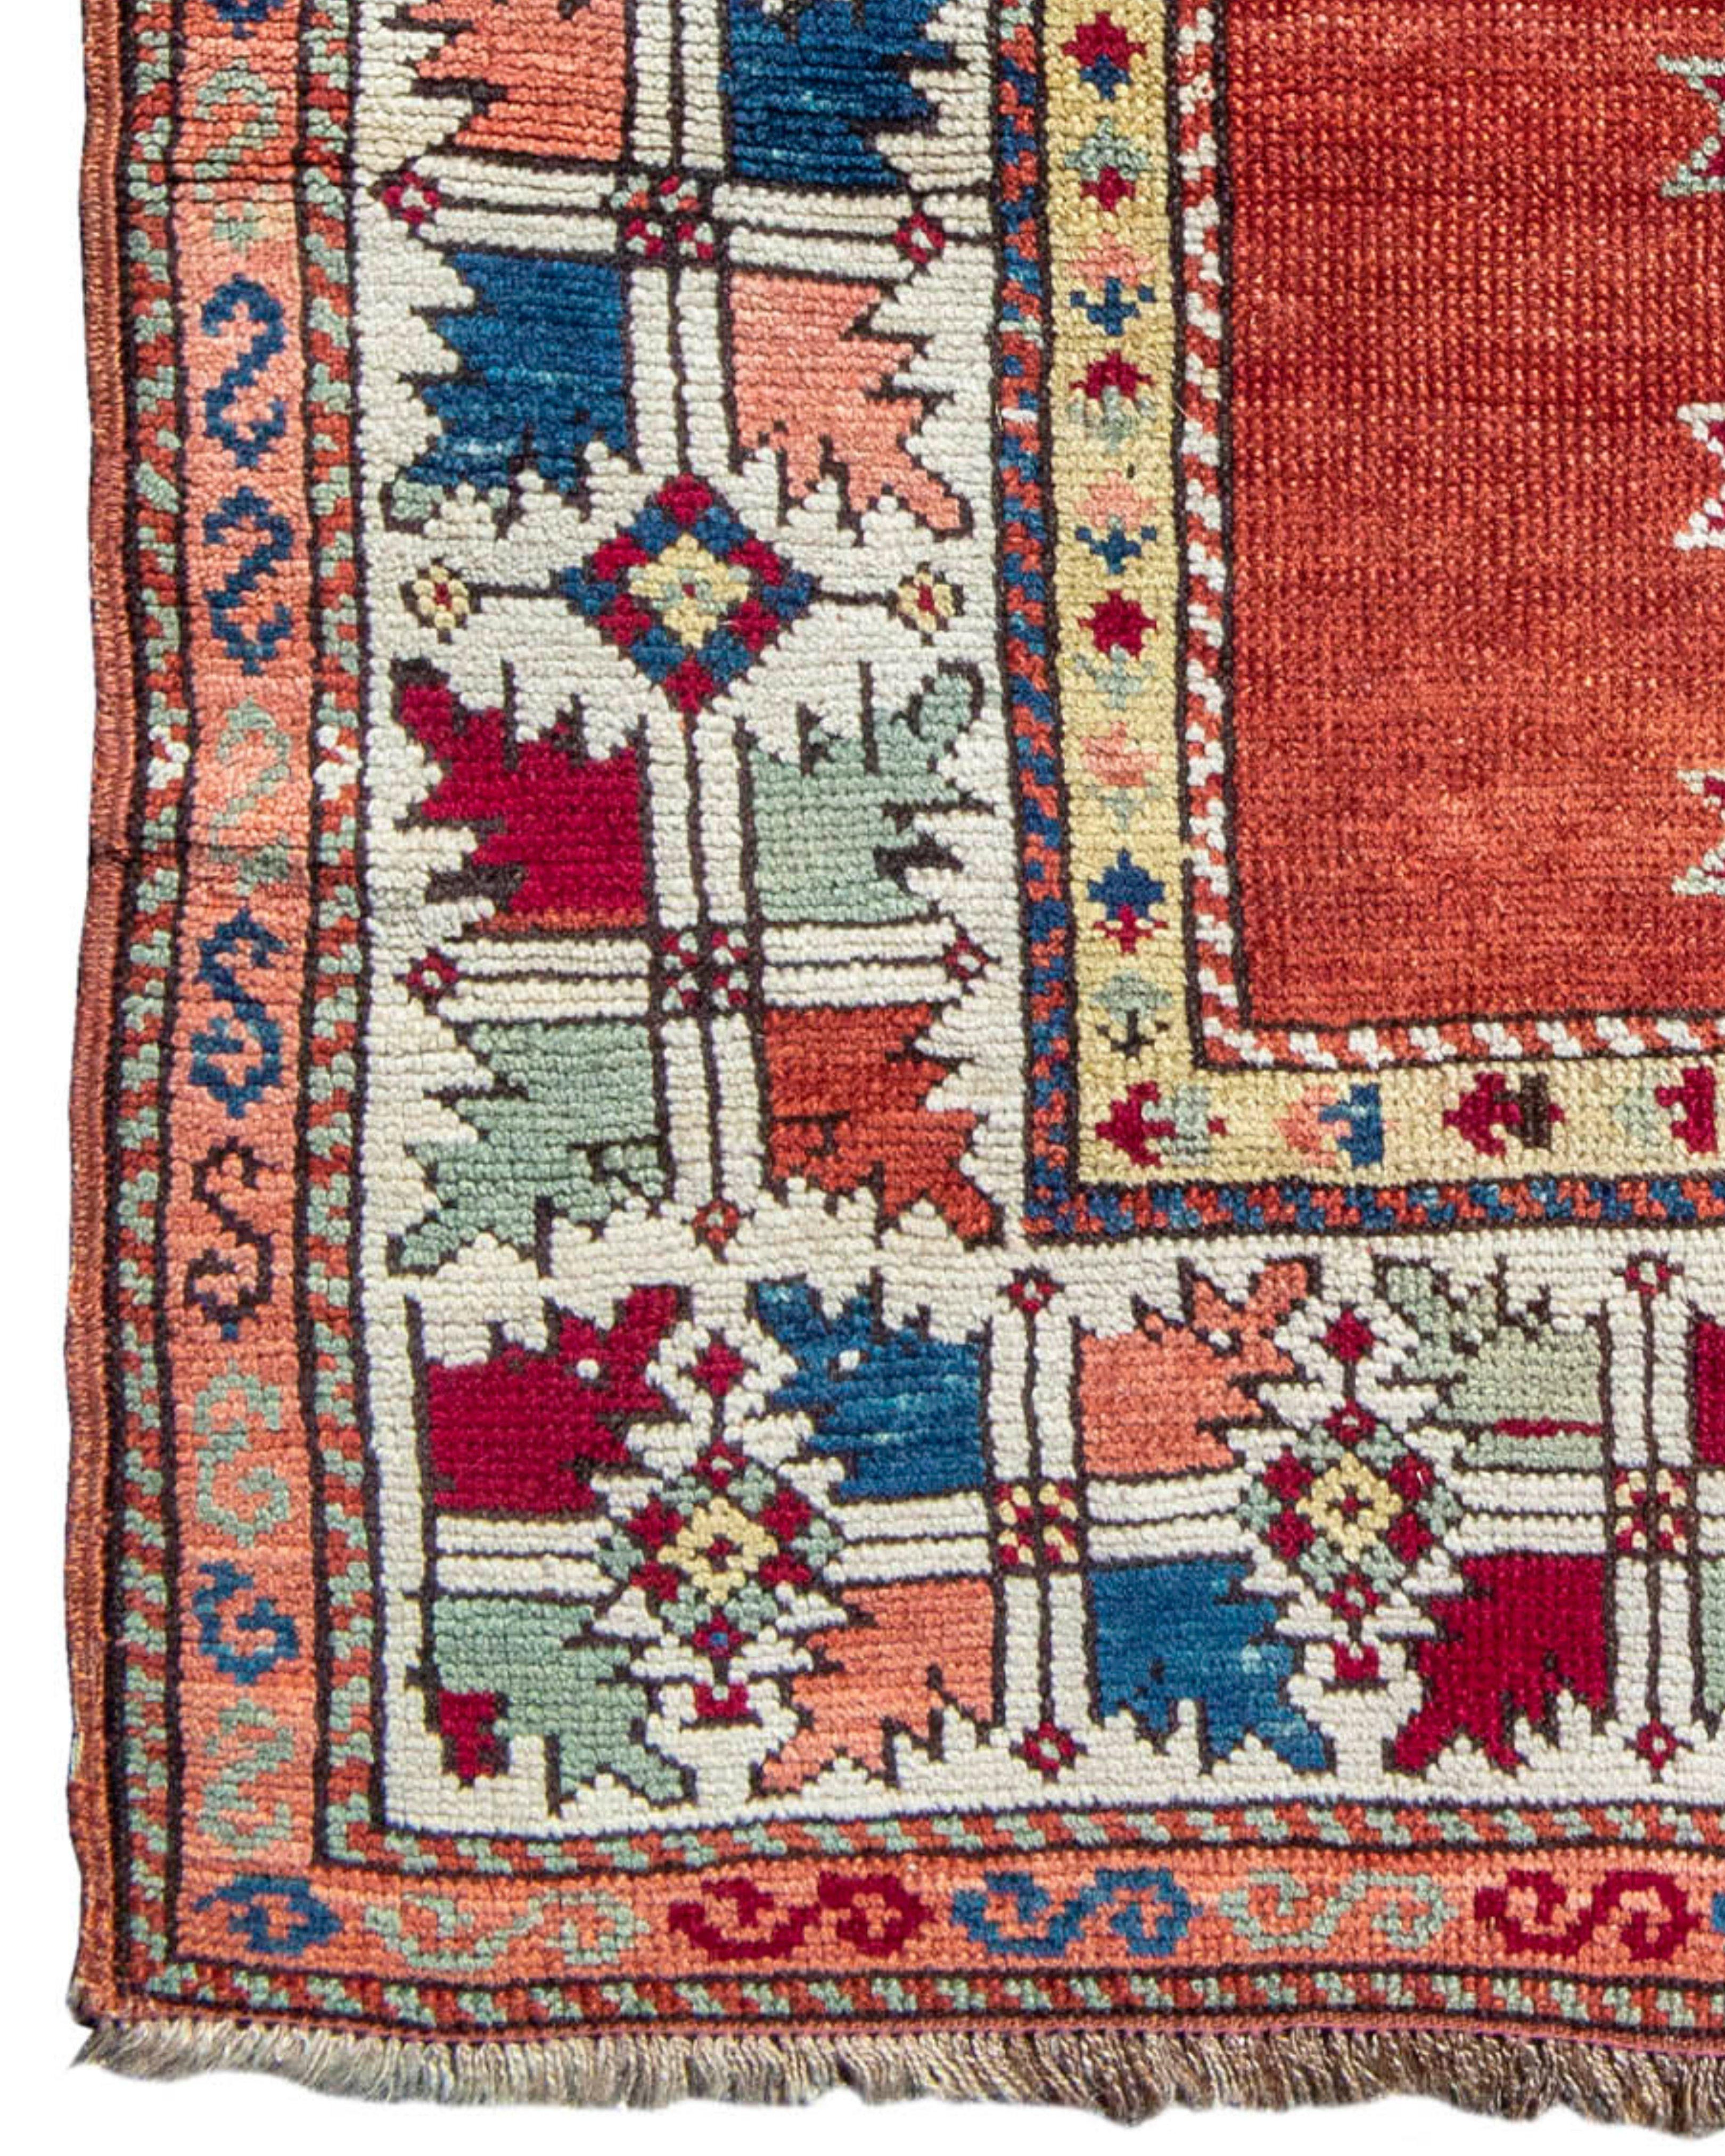 Antique Bergama Prayer Rug, 19th Century In Good Condition For Sale In San Francisco, CA